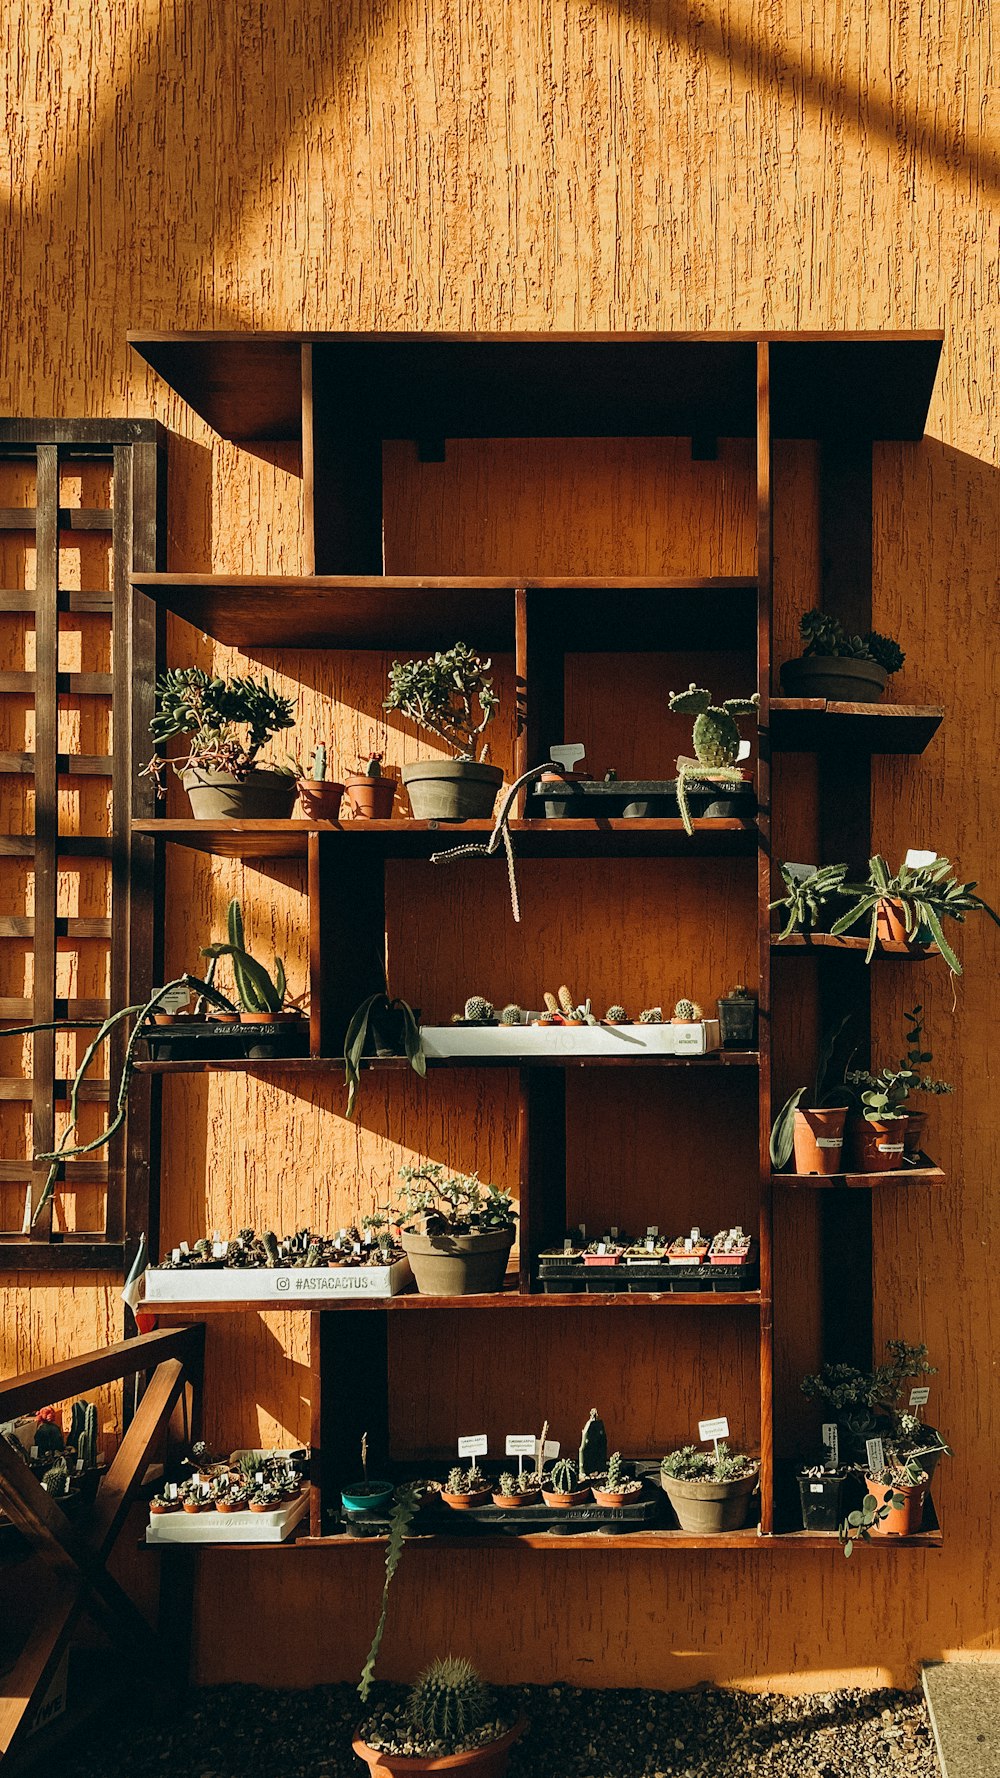 a wooden shelf filled with lots of potted plants